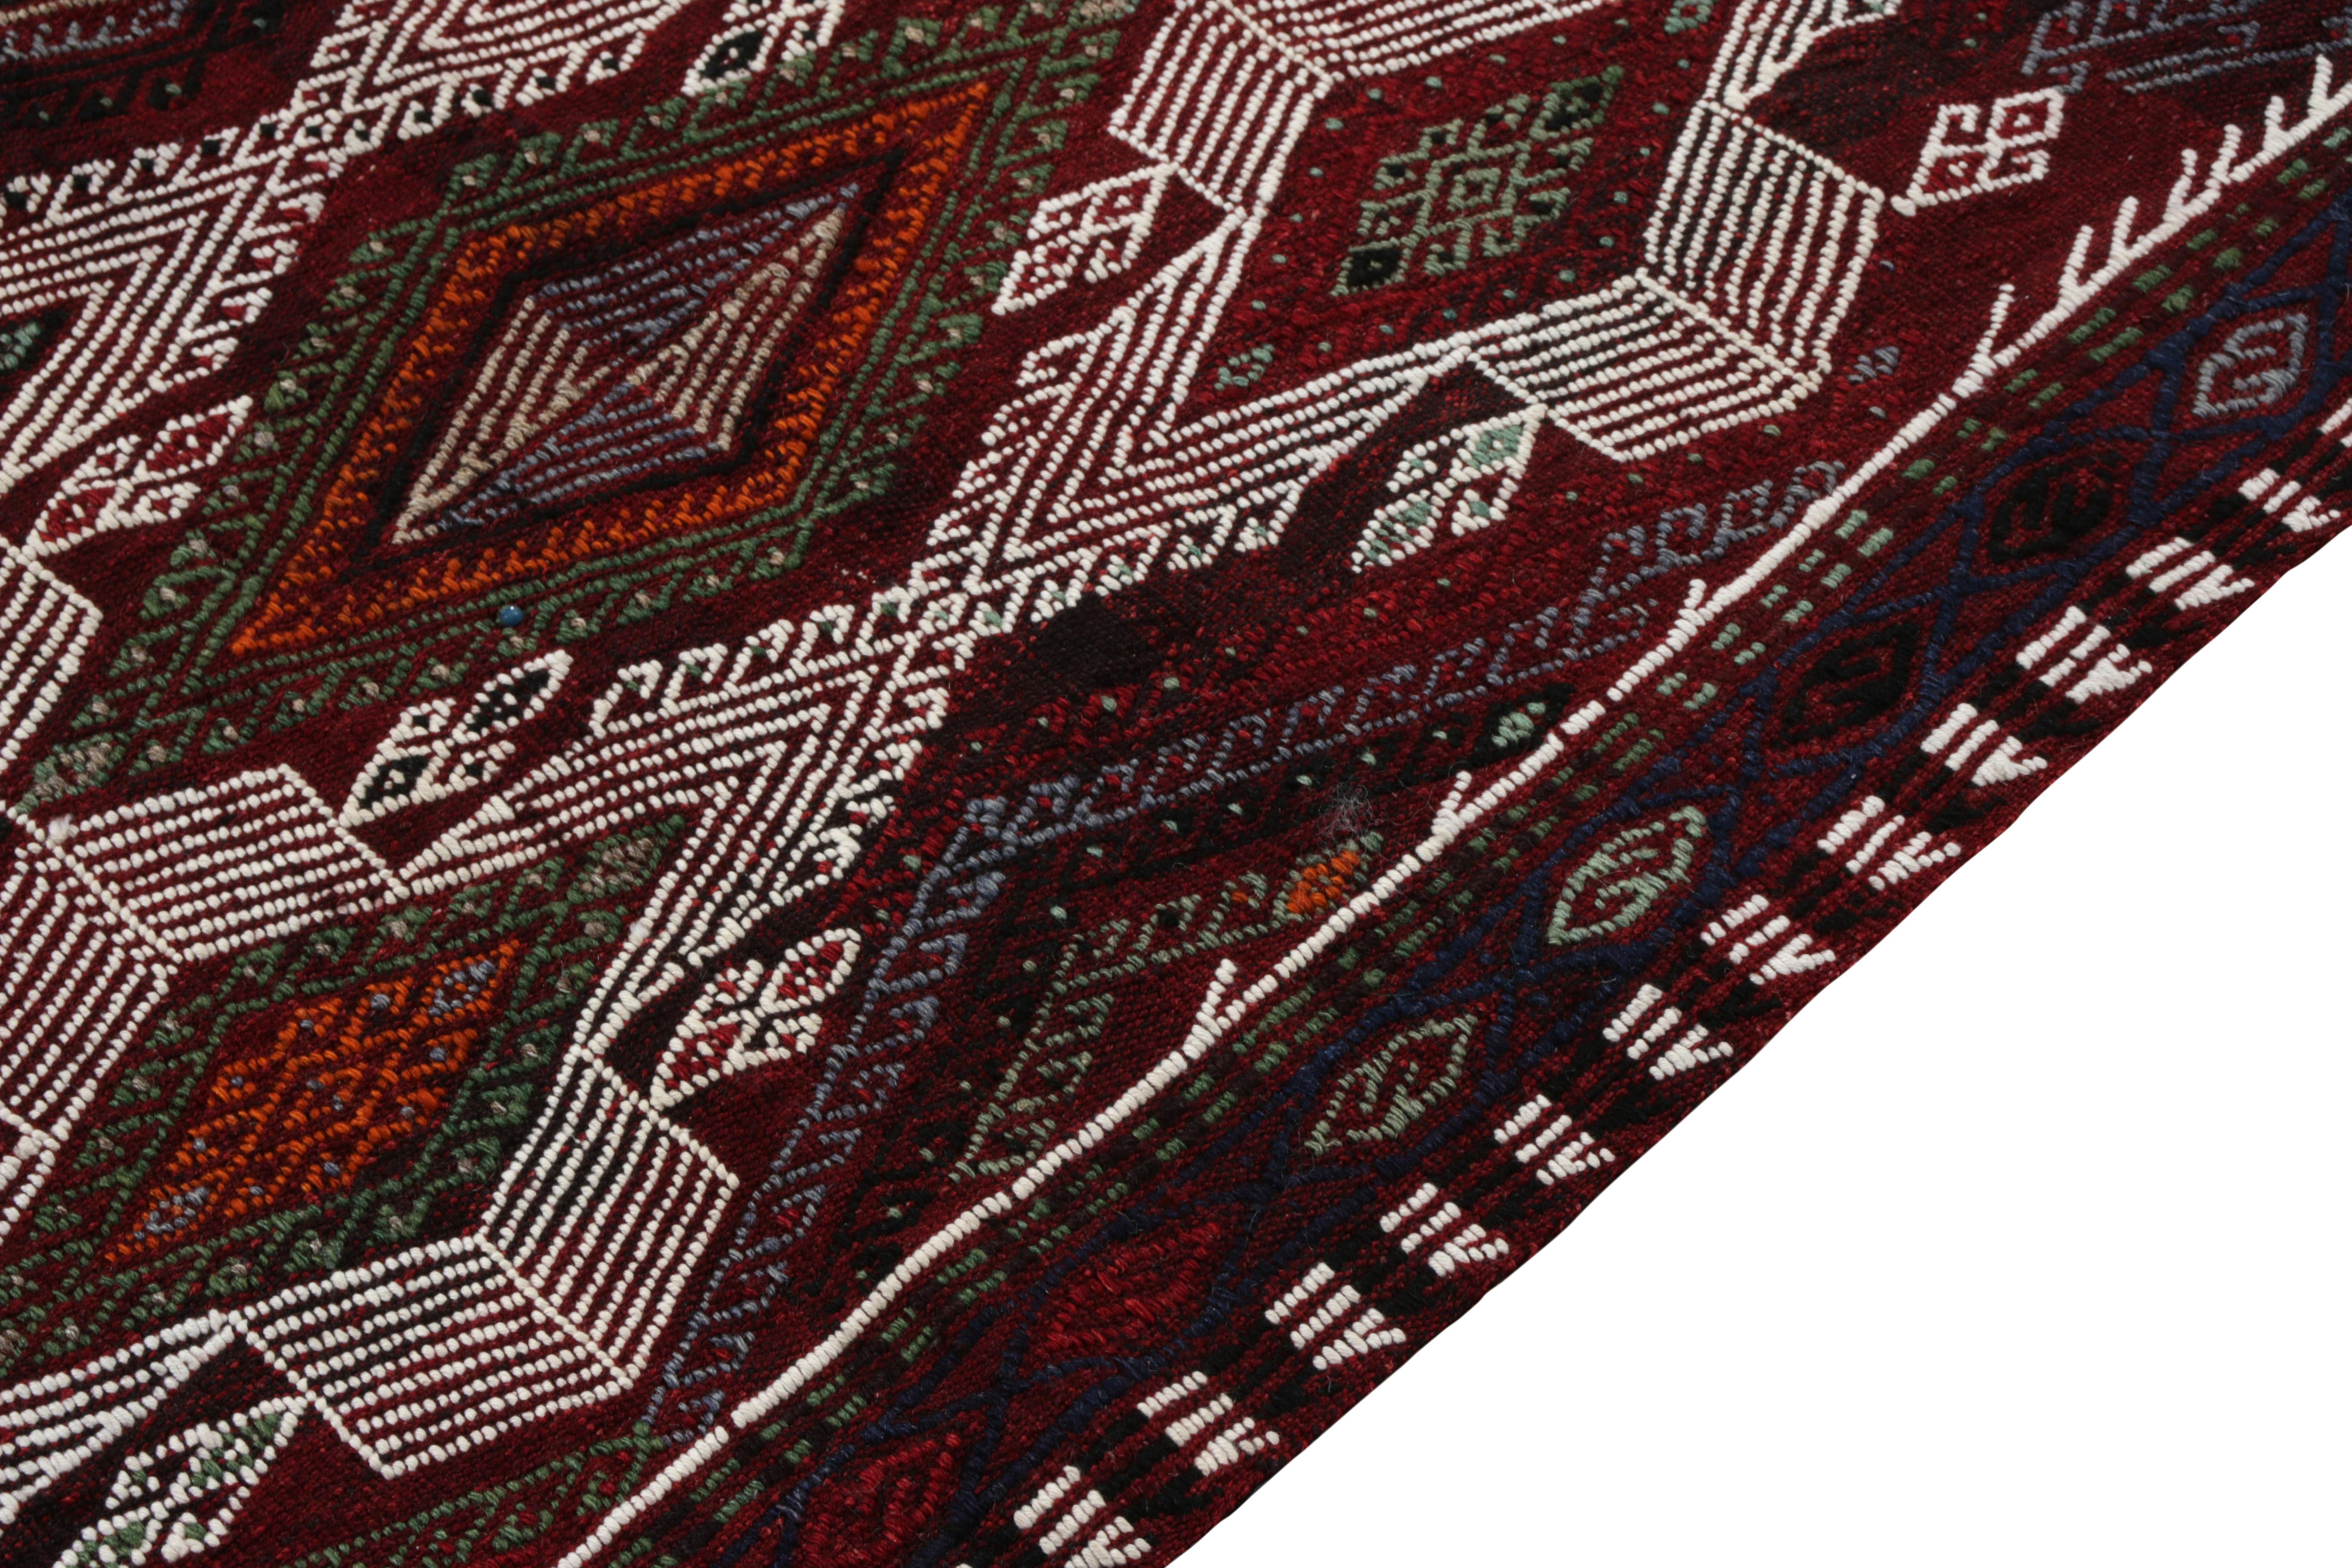 Turkish 1950s Vintage Handwoven Kilim Rug in Red Embroidered Diamonds by Rug & Kilim  For Sale